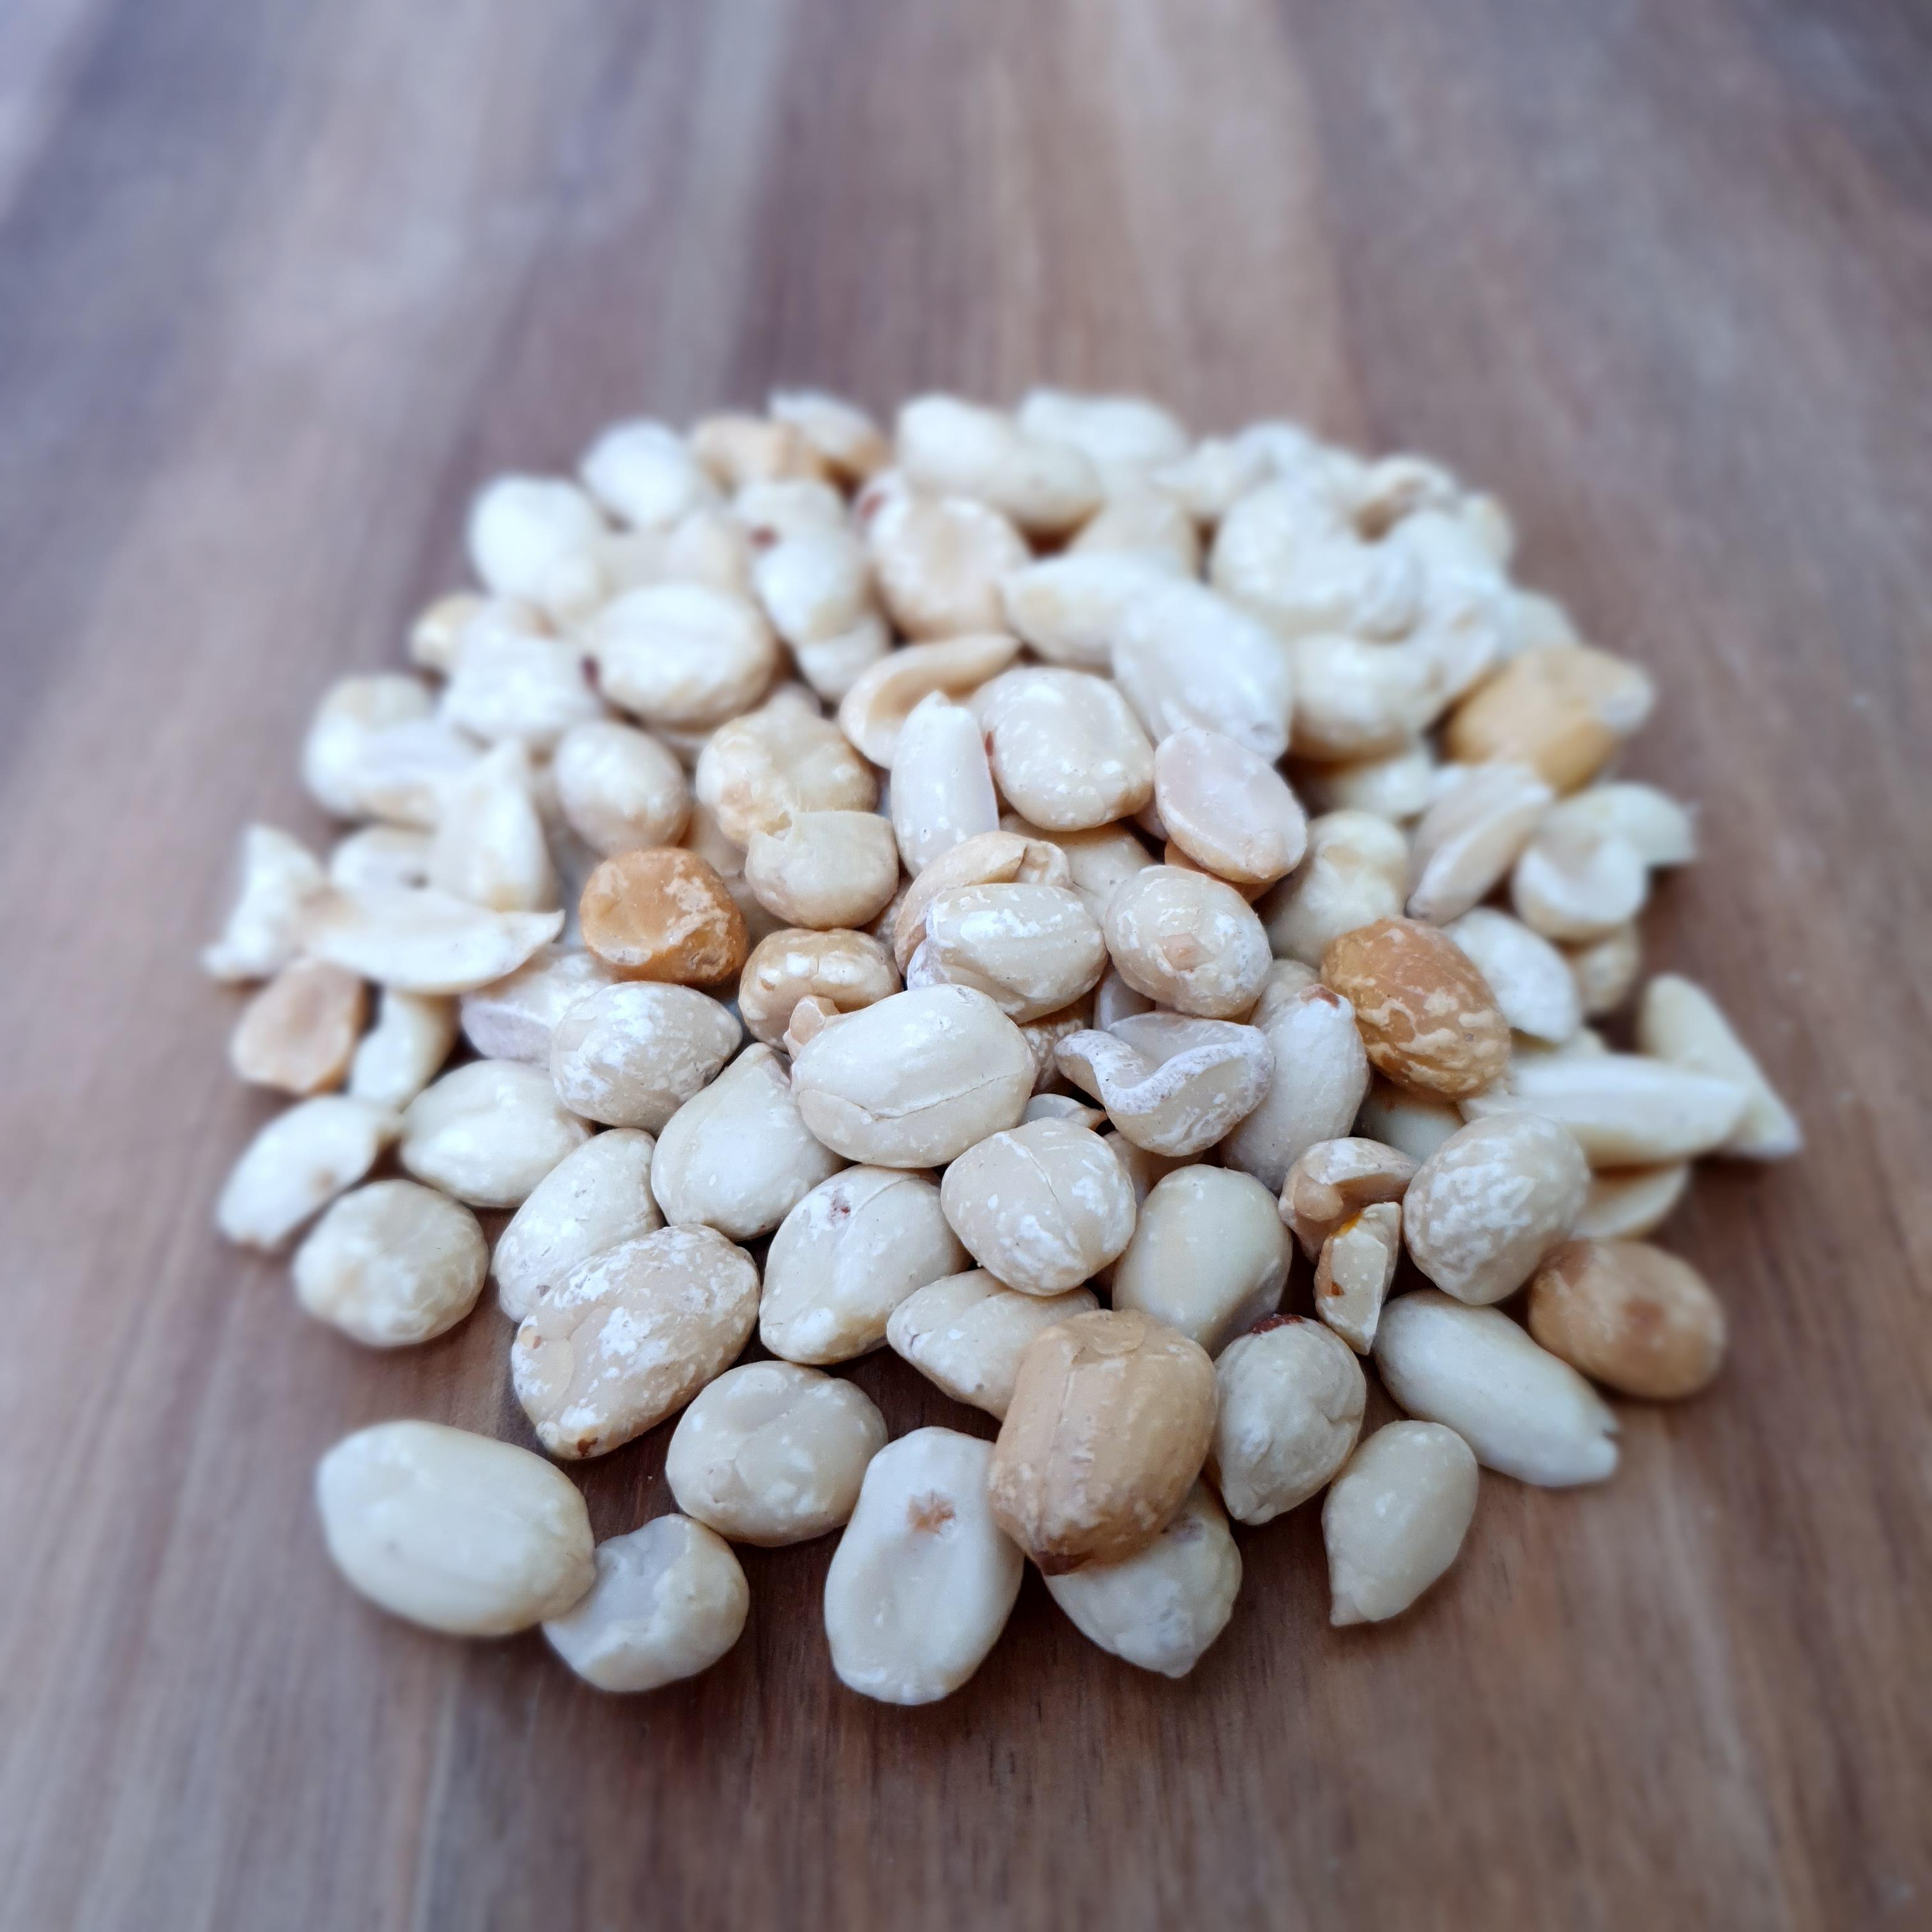 PEANUTS BLANCHED ROASTED PLAIN  1kg